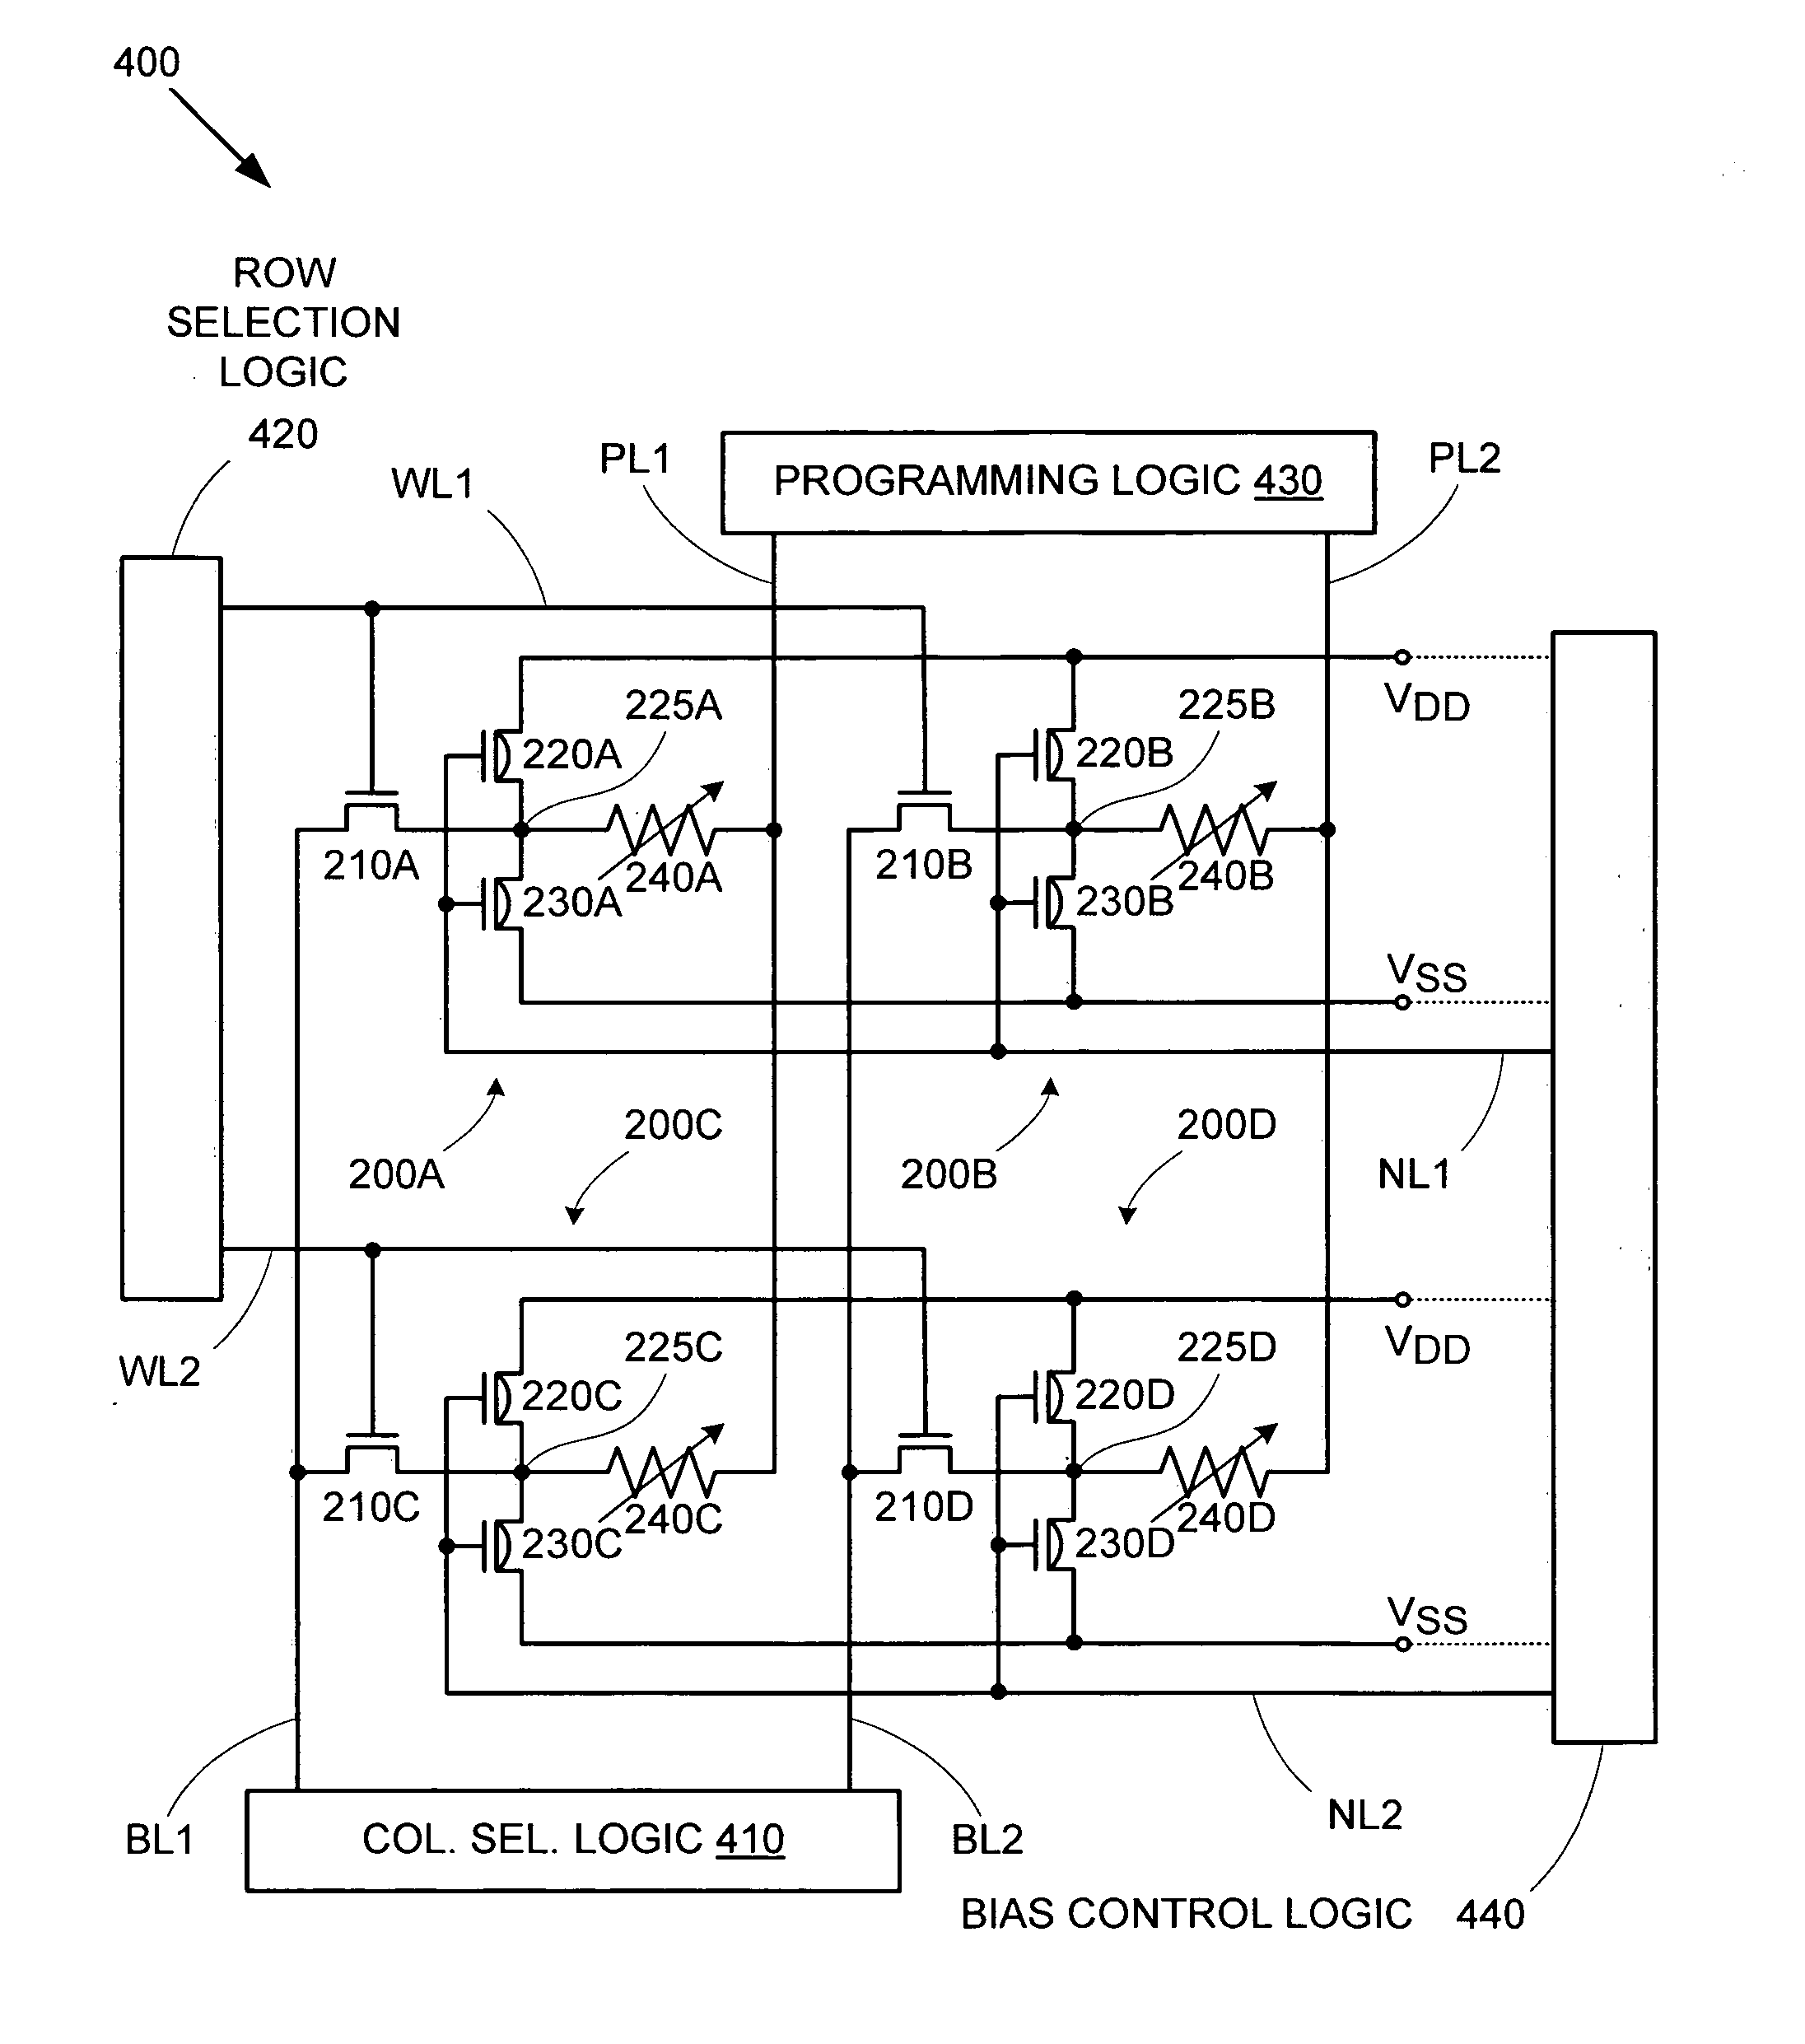 Compact static memory cell with non-volatile storage capability